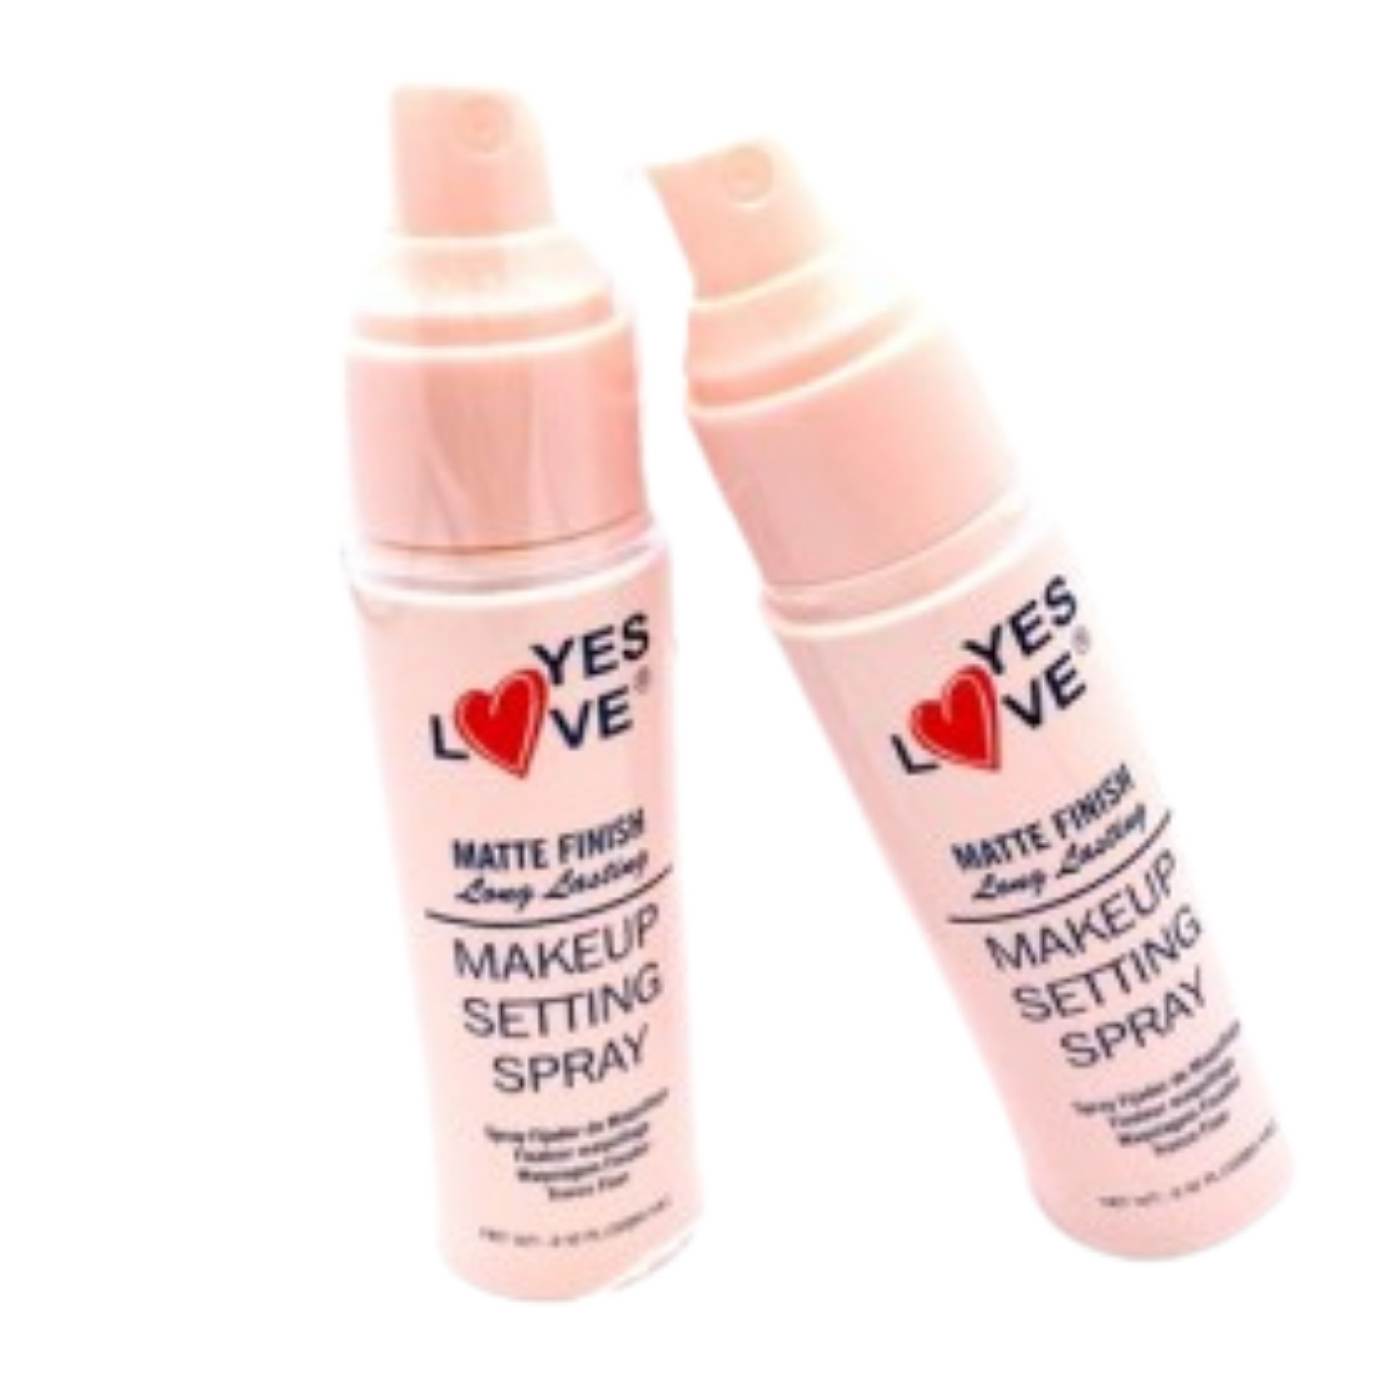 yes love cosmetics makeup SETTING FIXING SPRAY 2